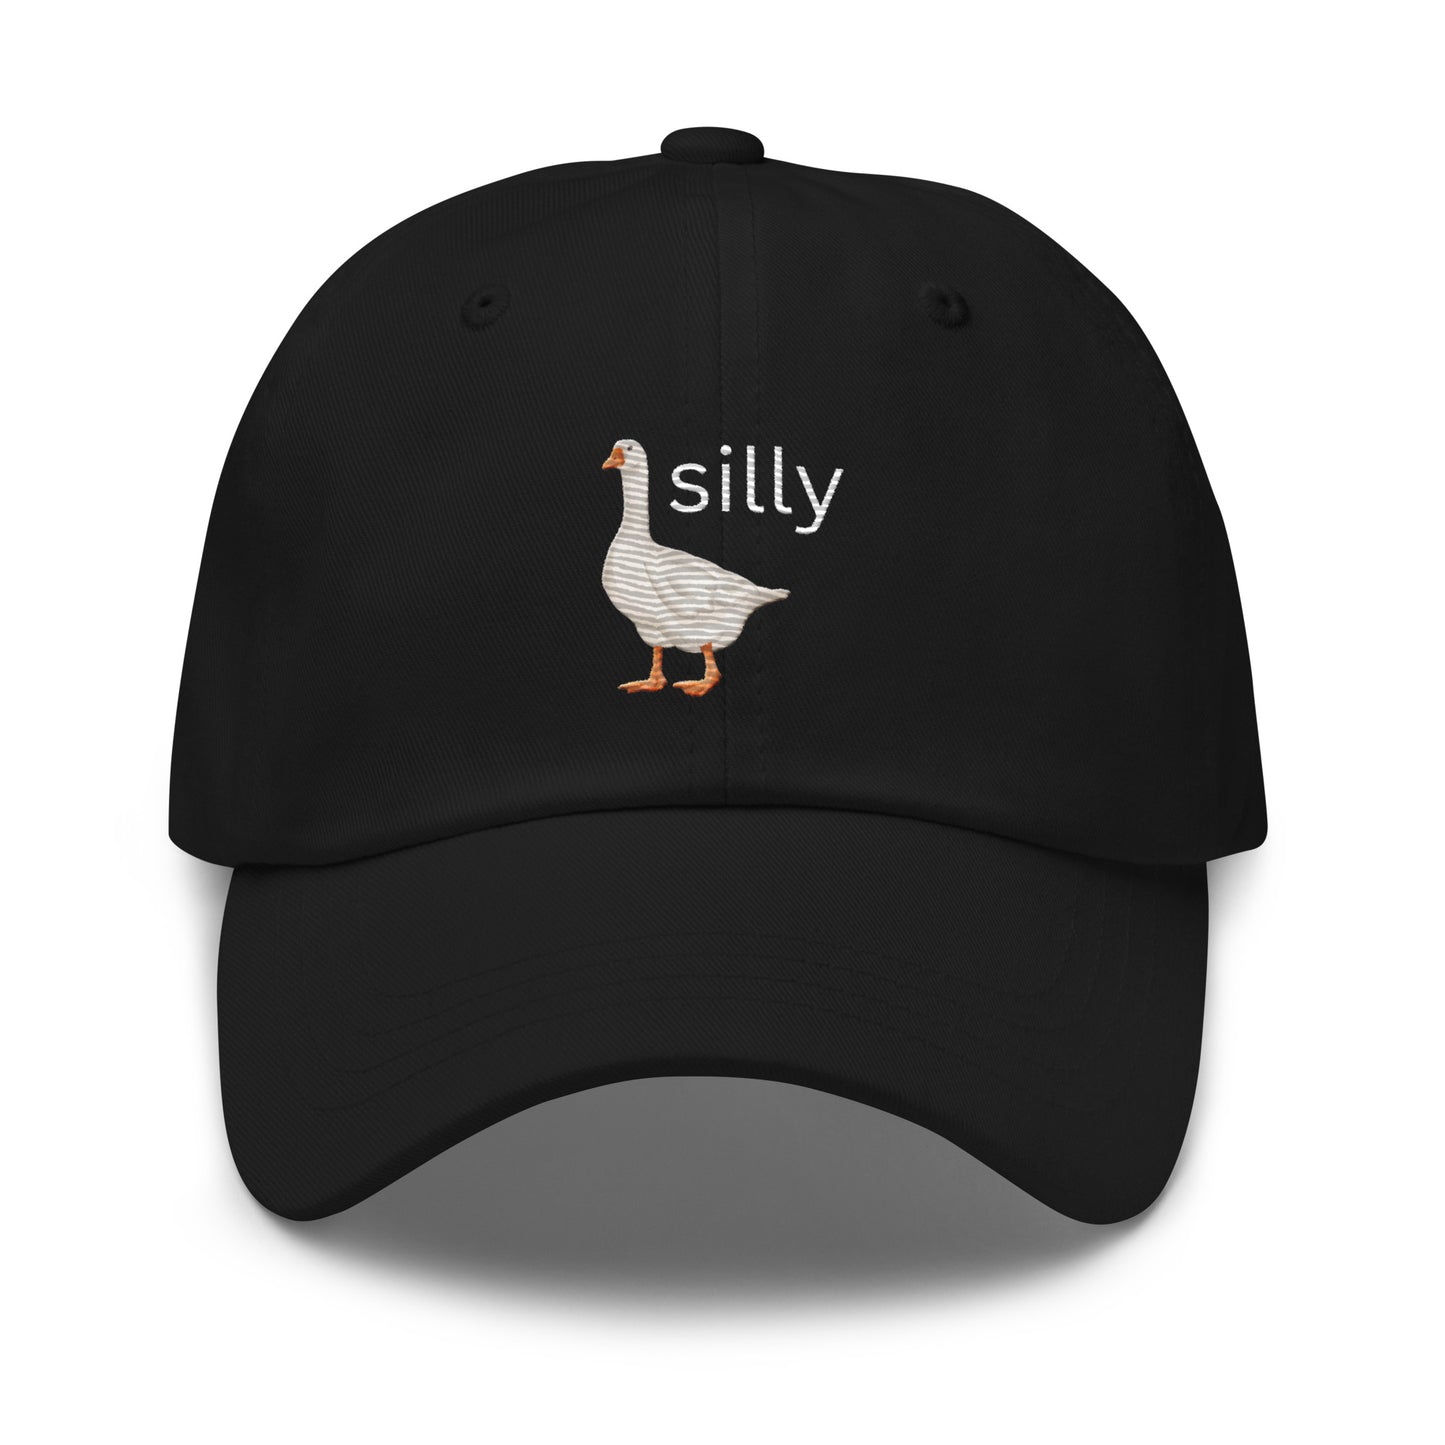 Silly Goose Hat